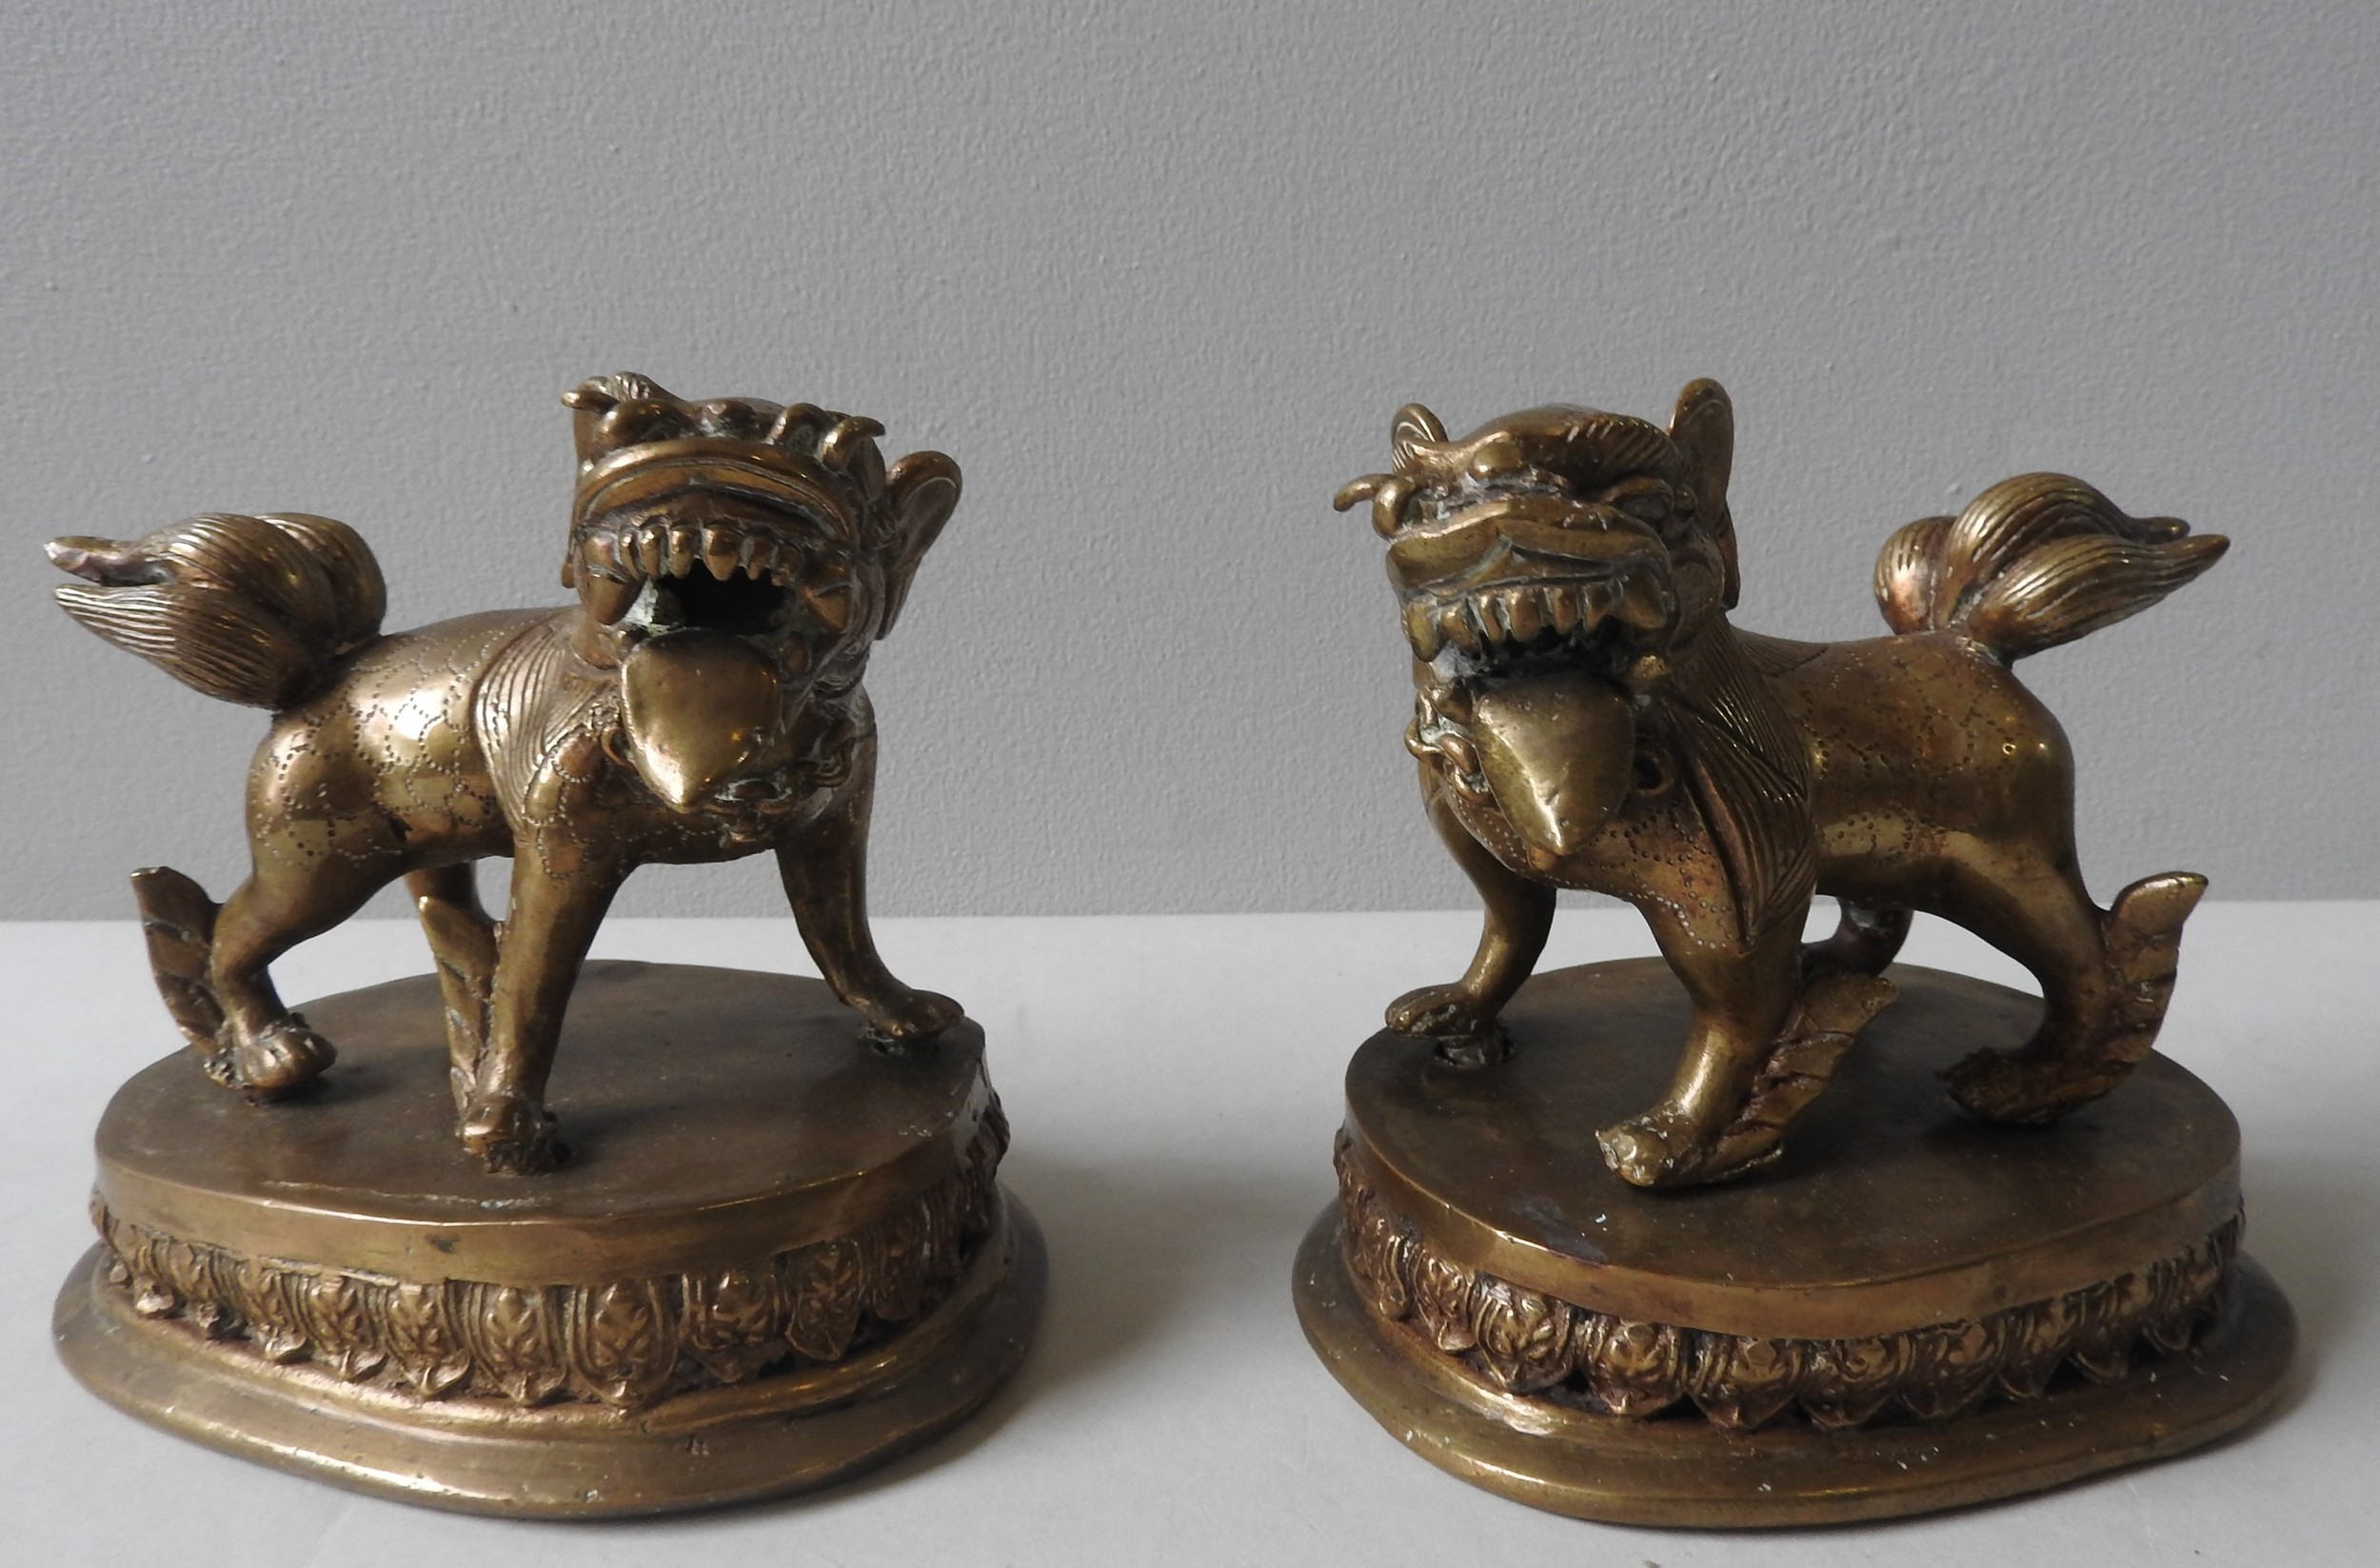 A PAIR OF LAQUERED BRASS CHINESE LIONS, QING DYNASTY, standing foursquare on lotus bases 14 cm high